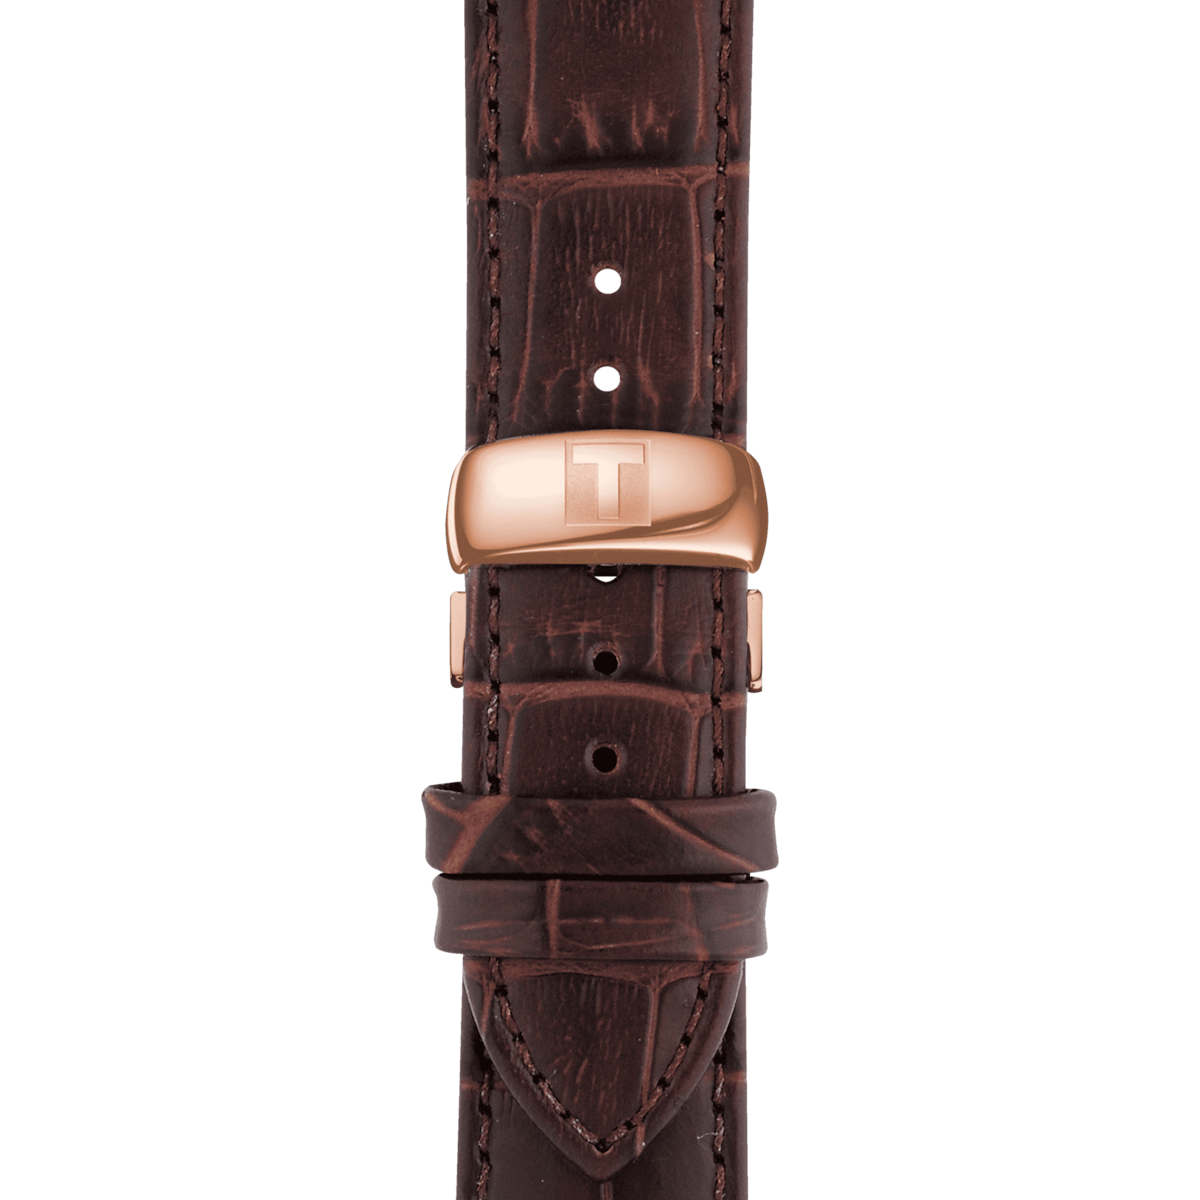 T-Classic Tradition Rose Gold & Brown Leather